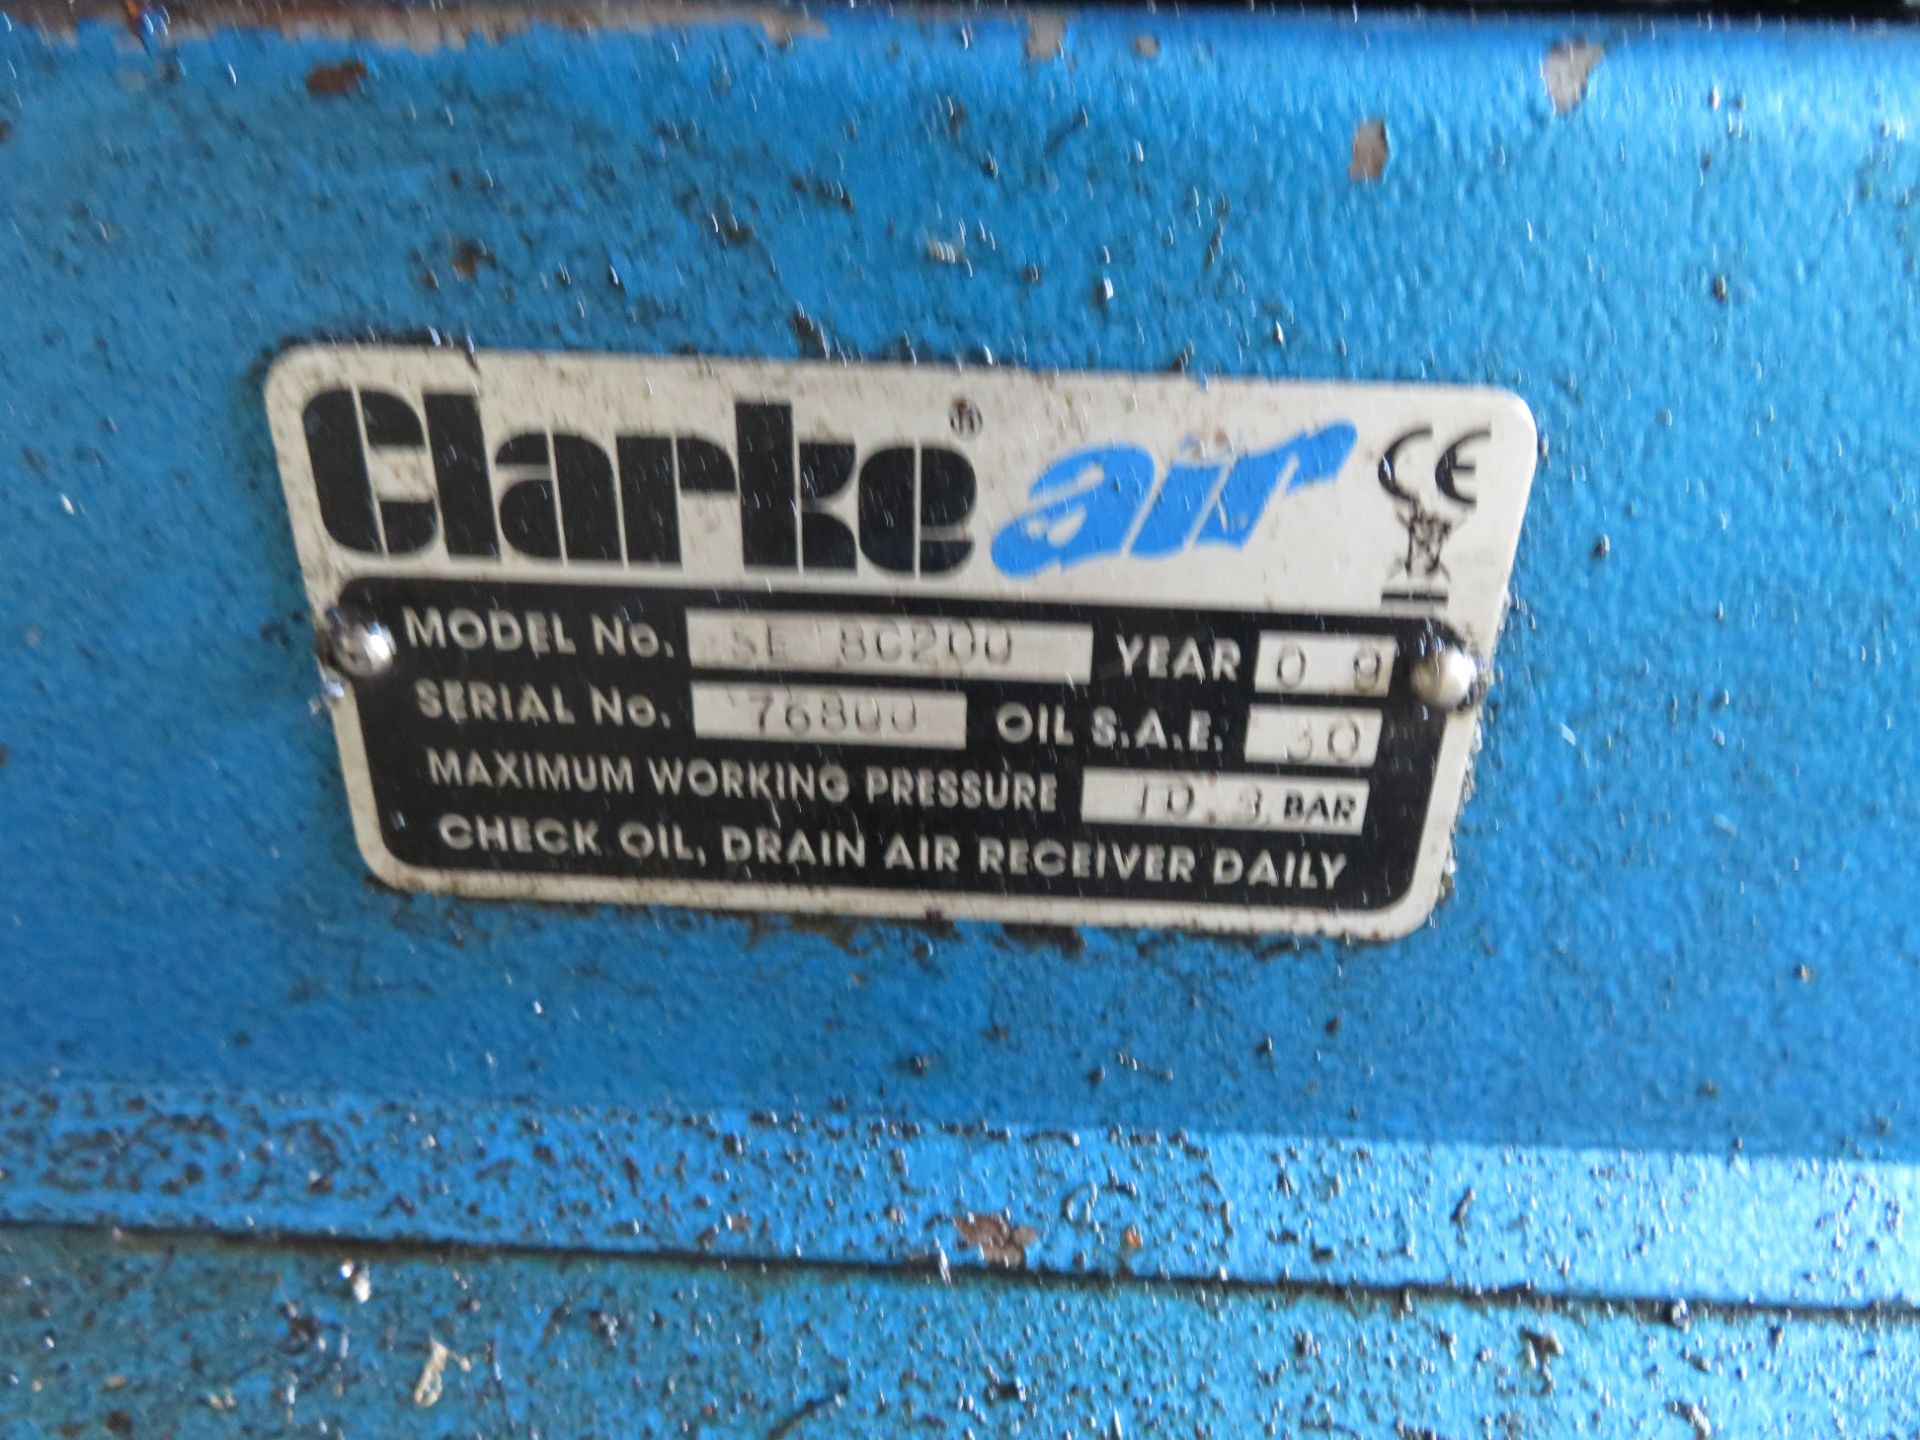 2x Clarke Air Receiver Mounted Compressors - Image 5 of 5